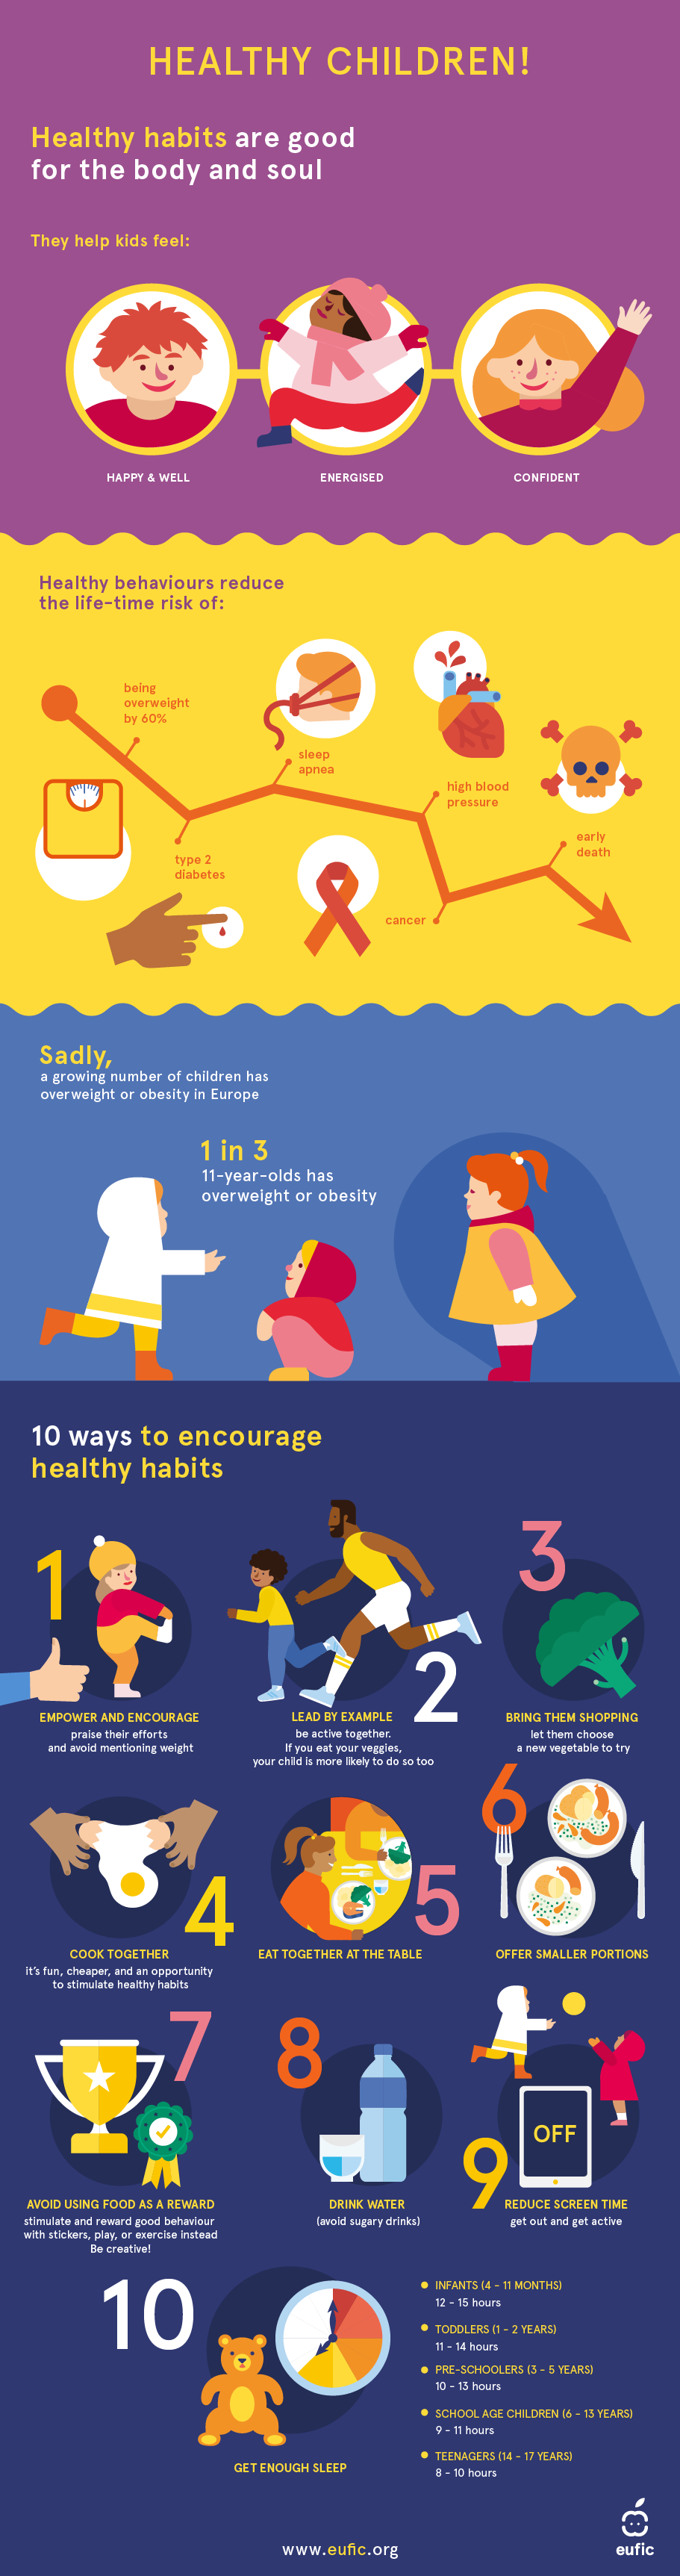 infographic on childhood obesity providing 10 science-based tips to encourage healthy habits for kids